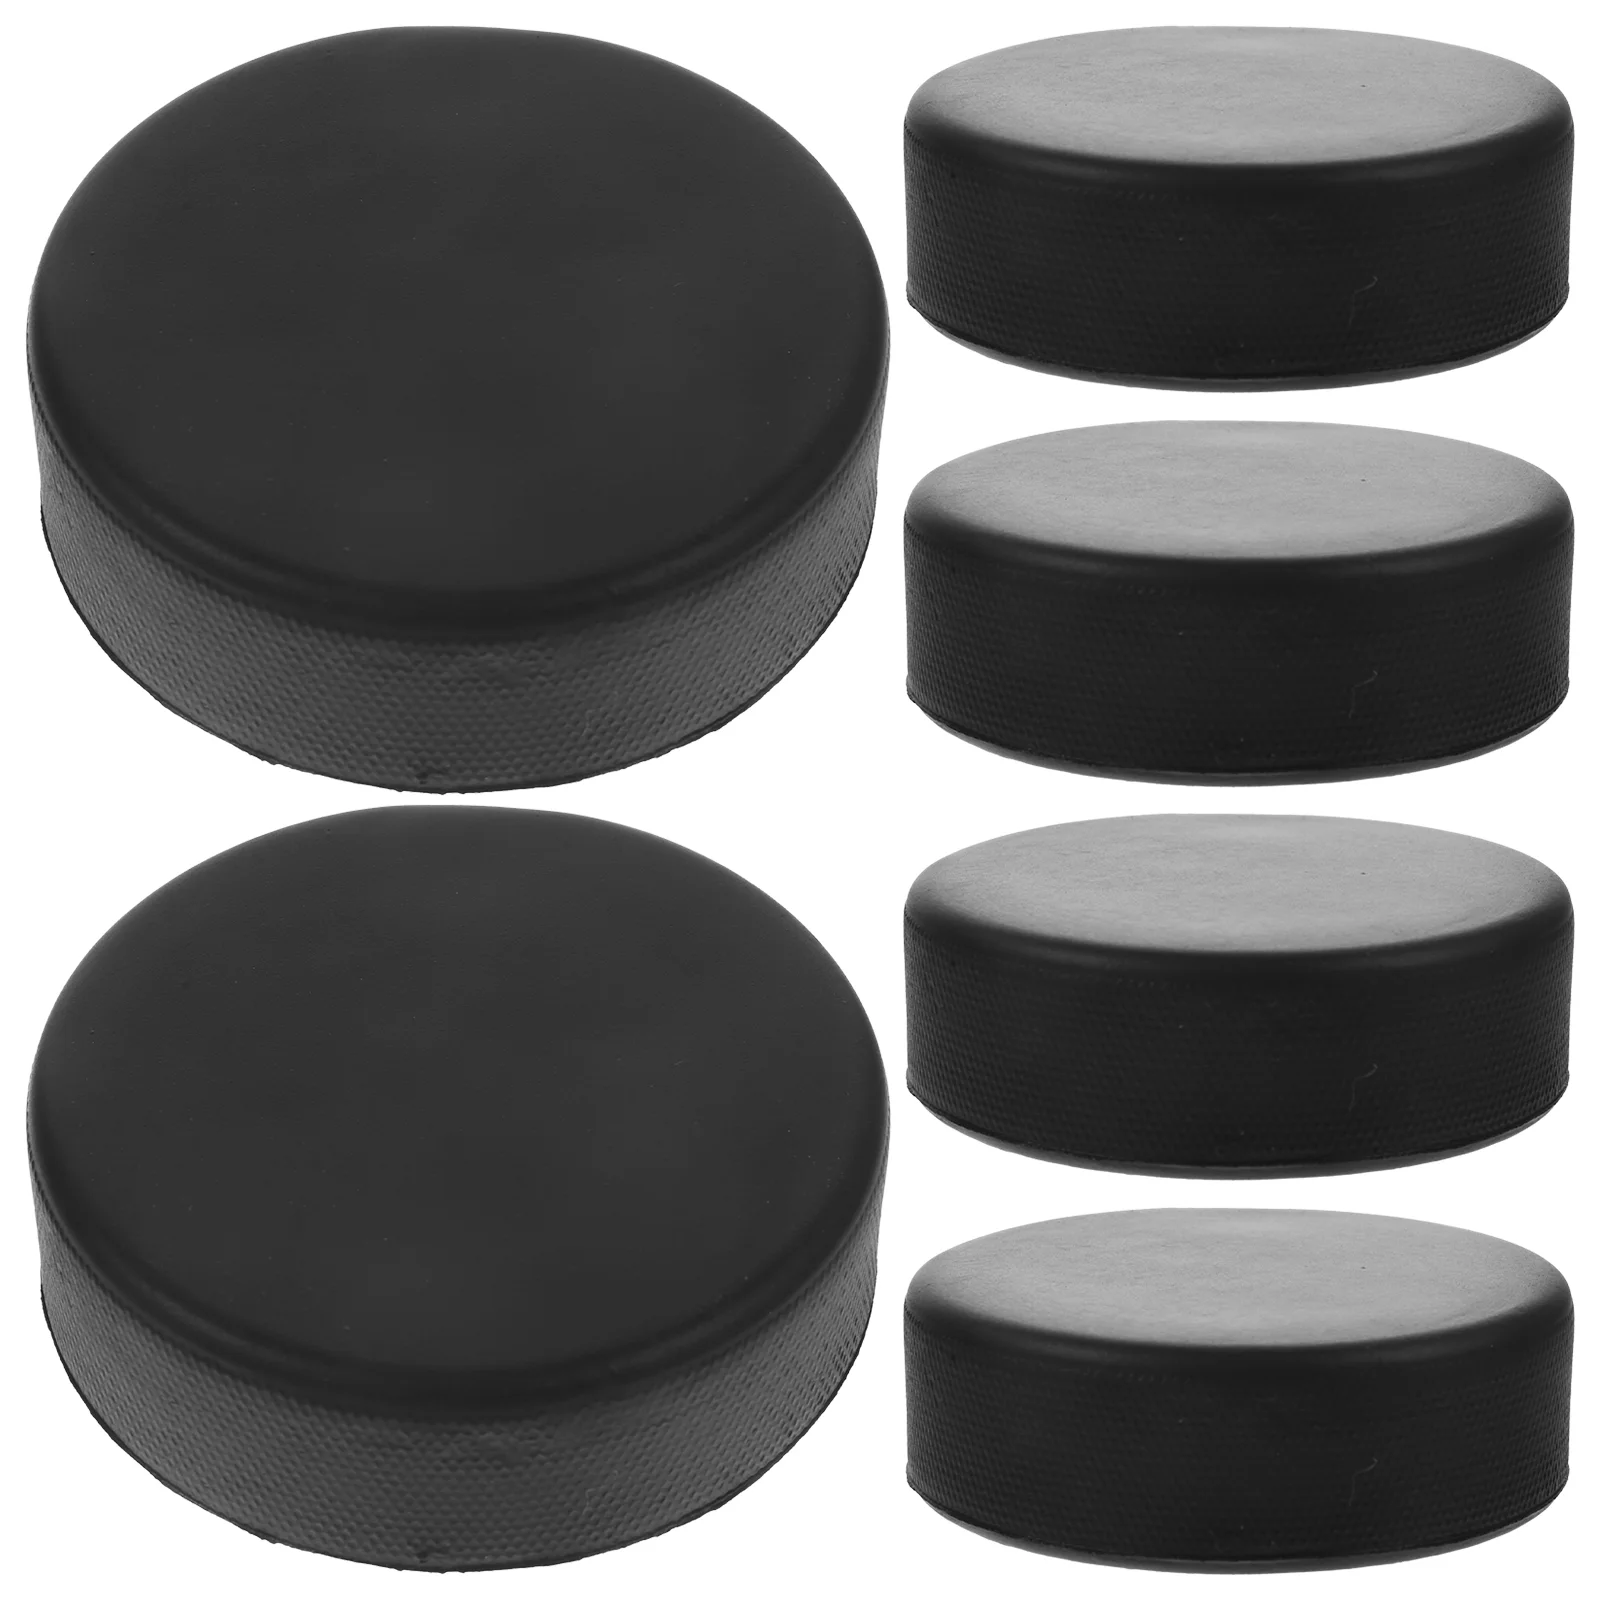 

6 Pcs Hockey Puck Training Supplies Practicing Ice Race Solid Official Regulation Pvc